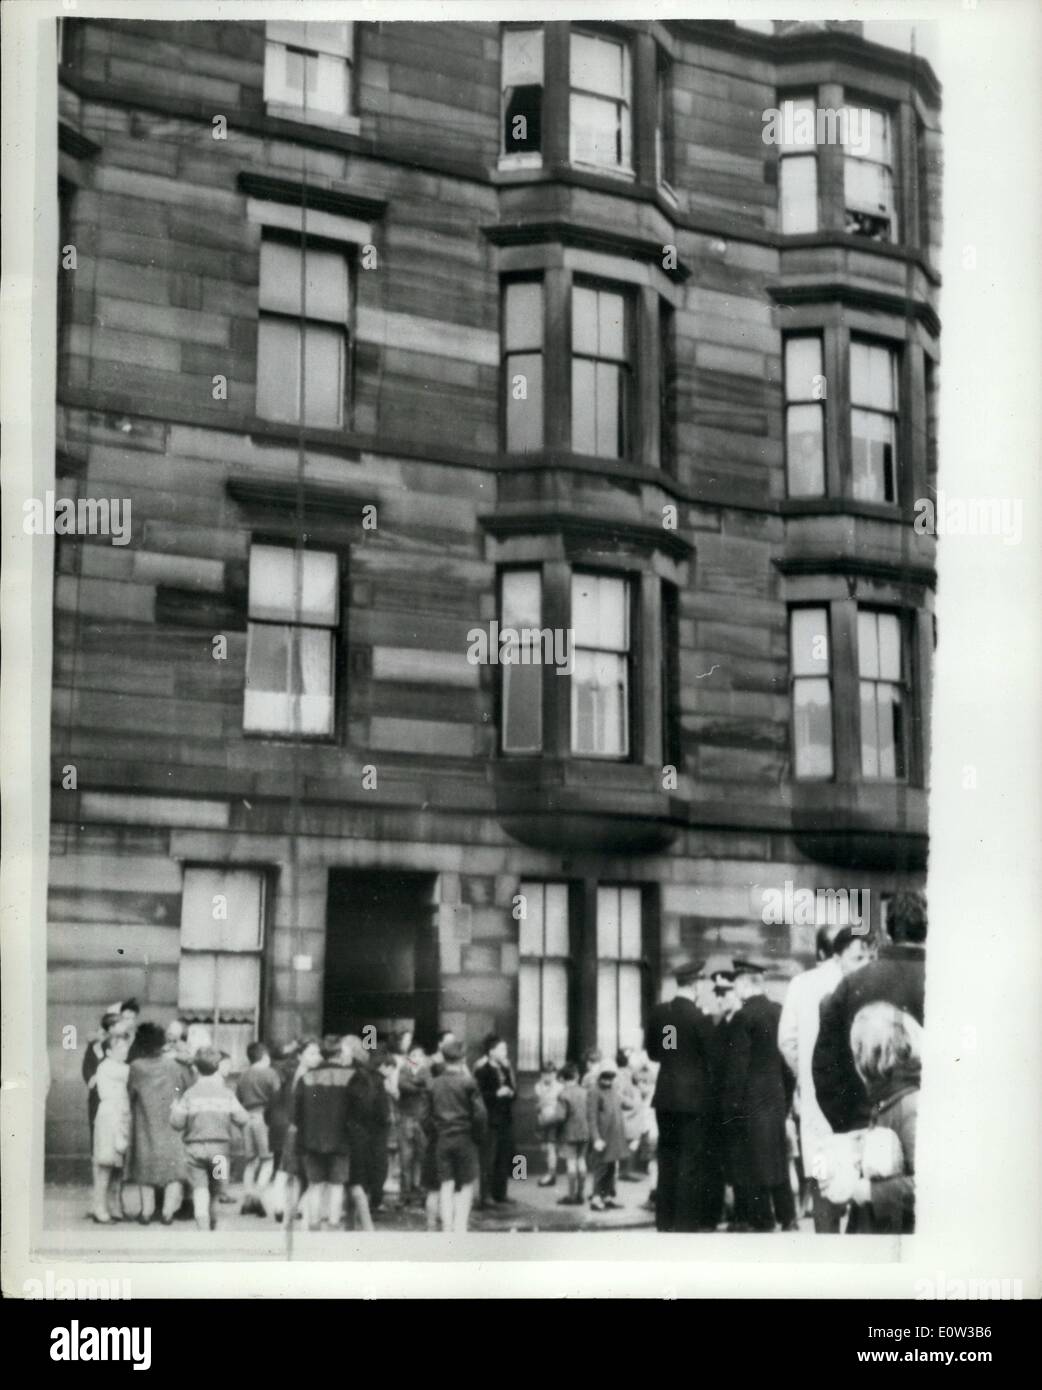 Mar. 03, 1961 - Five Children Fail From High Window. One Dies - Woman Charged With Murder In Glasgow: A woman was charged with murder and attempted murder - in Glasgow last night after five children had plunged from a third-floor window in a block of tenement flats. One child was killed and the others were seriously injured. The dead child was four year old Margaret Hughes, the others being Tom Devenny (4); Danny McNeill (7); Frank Lennon (7) and his sister Margaret (3). Photo shows The tenement block in Glasgow showing the third floor window from which the five children fell. Stock Photo